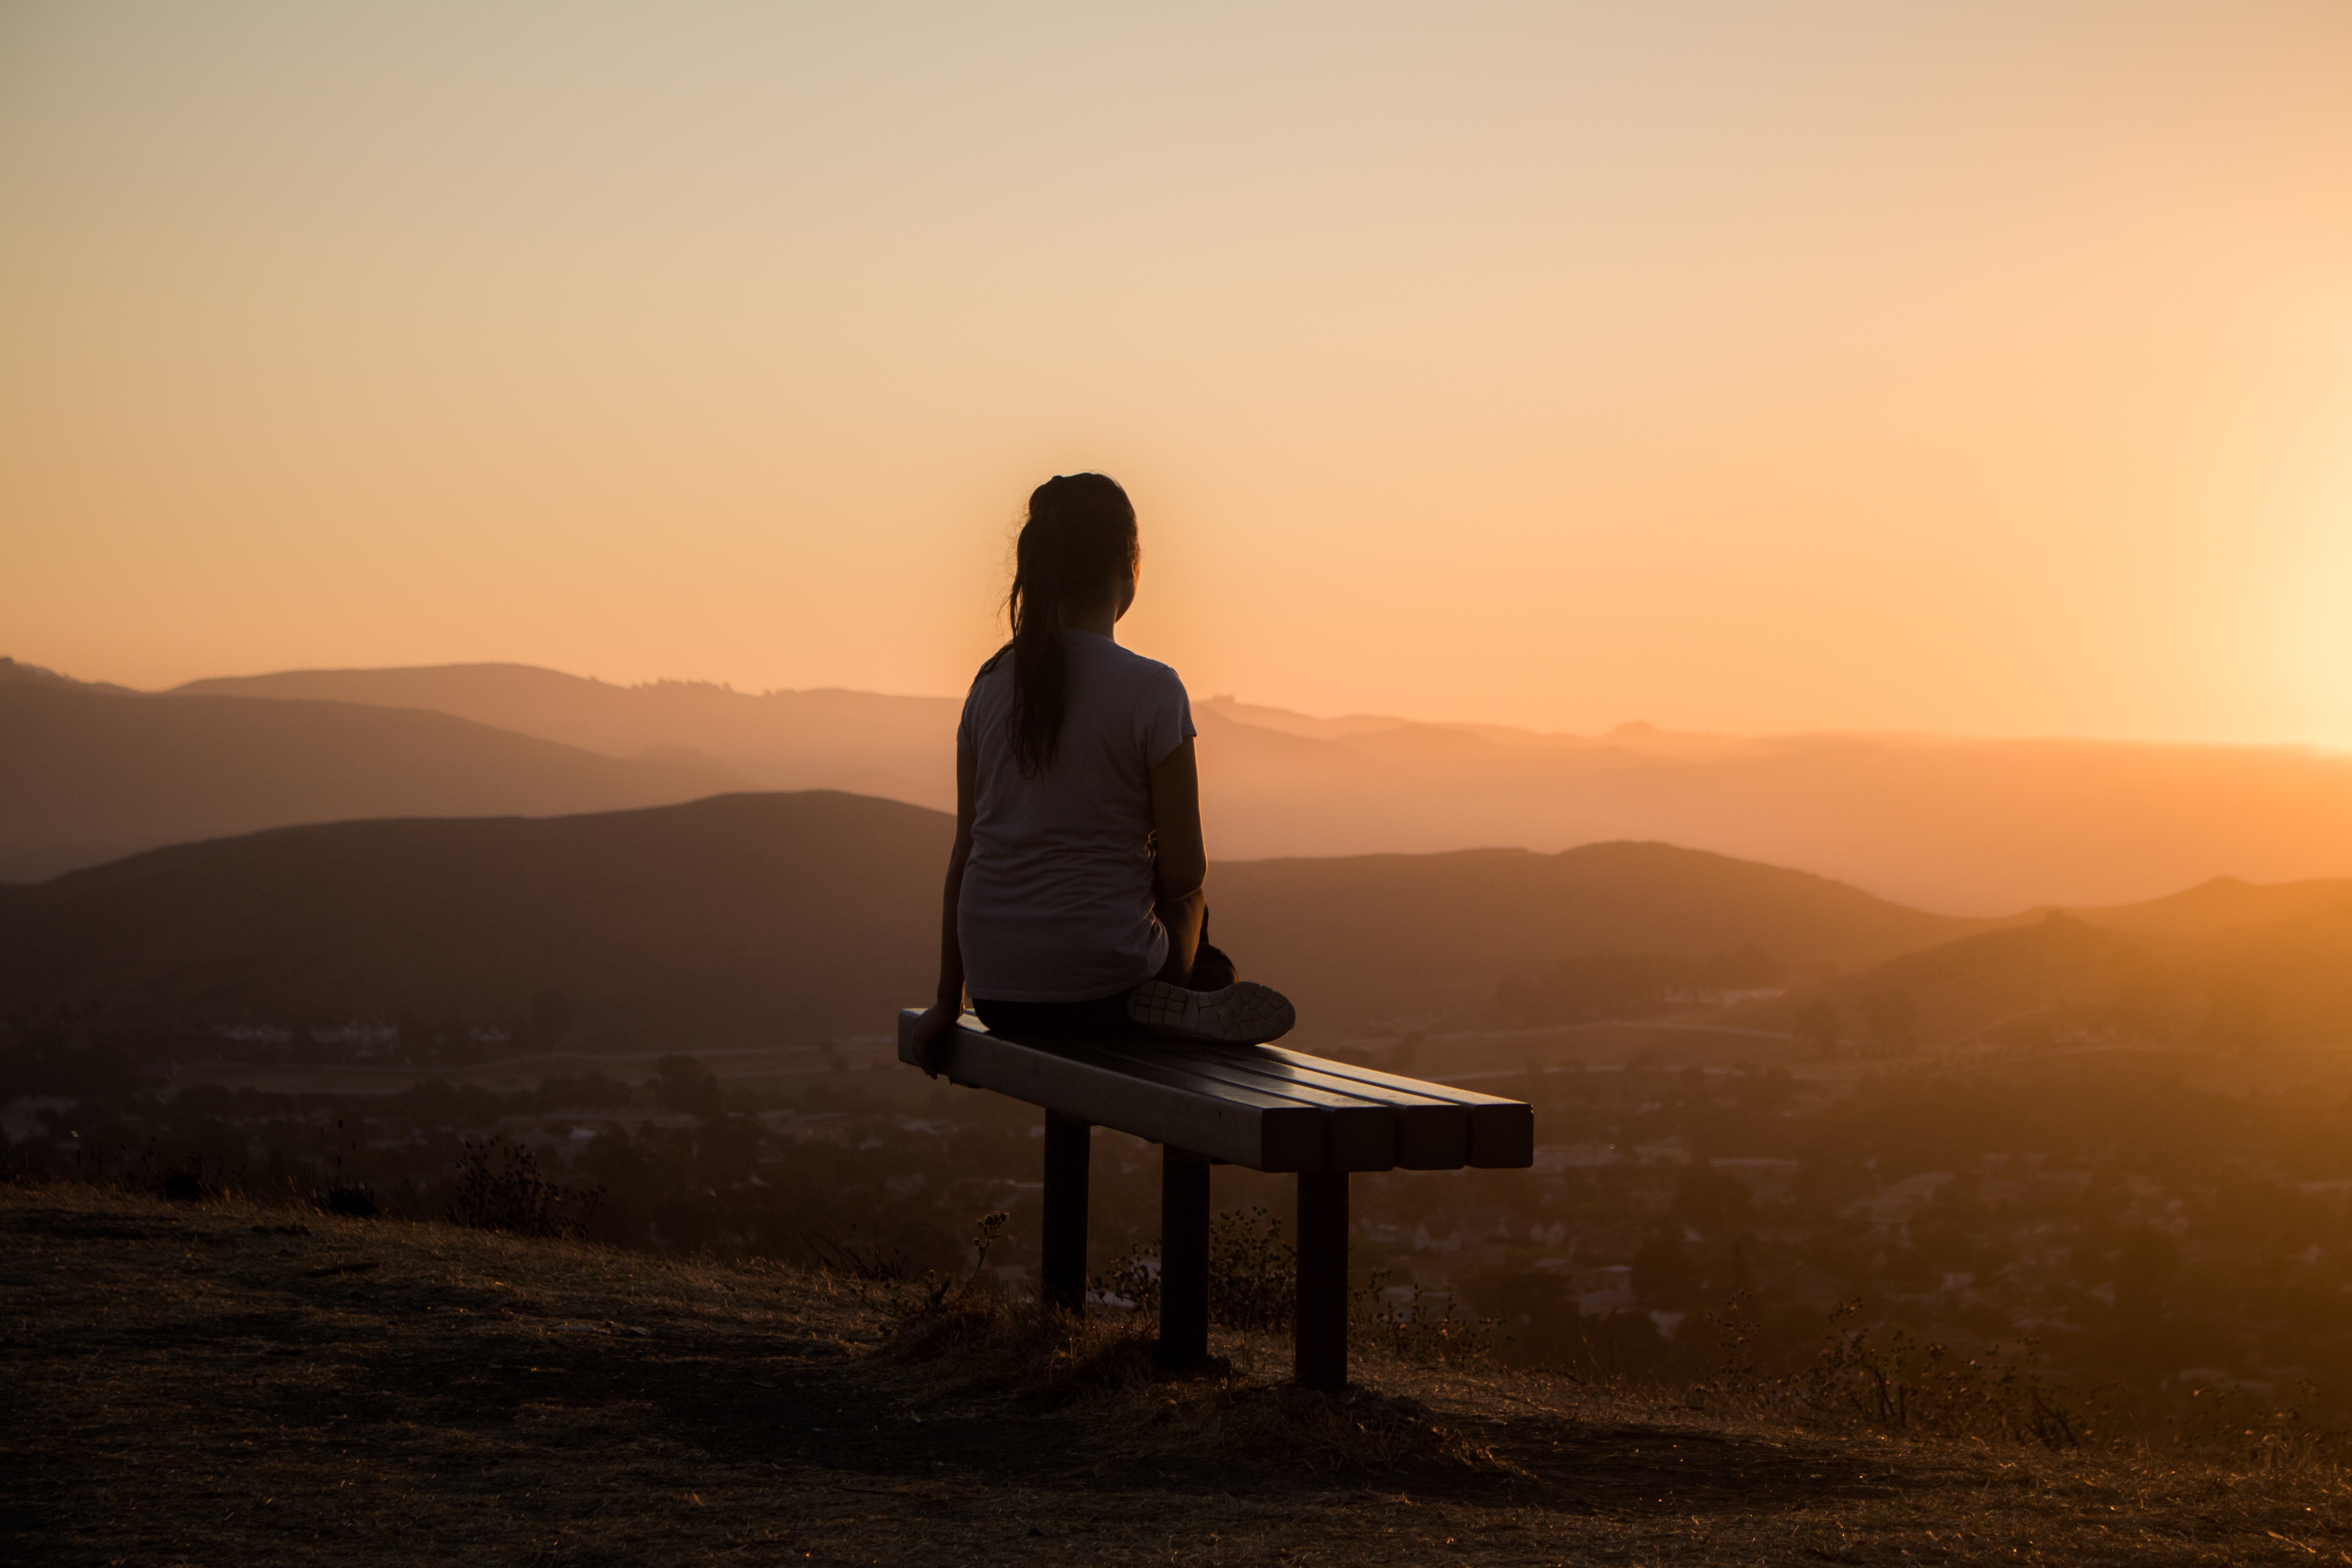 young woman sitting on bench facing the sunrise over the mountains, yellowish